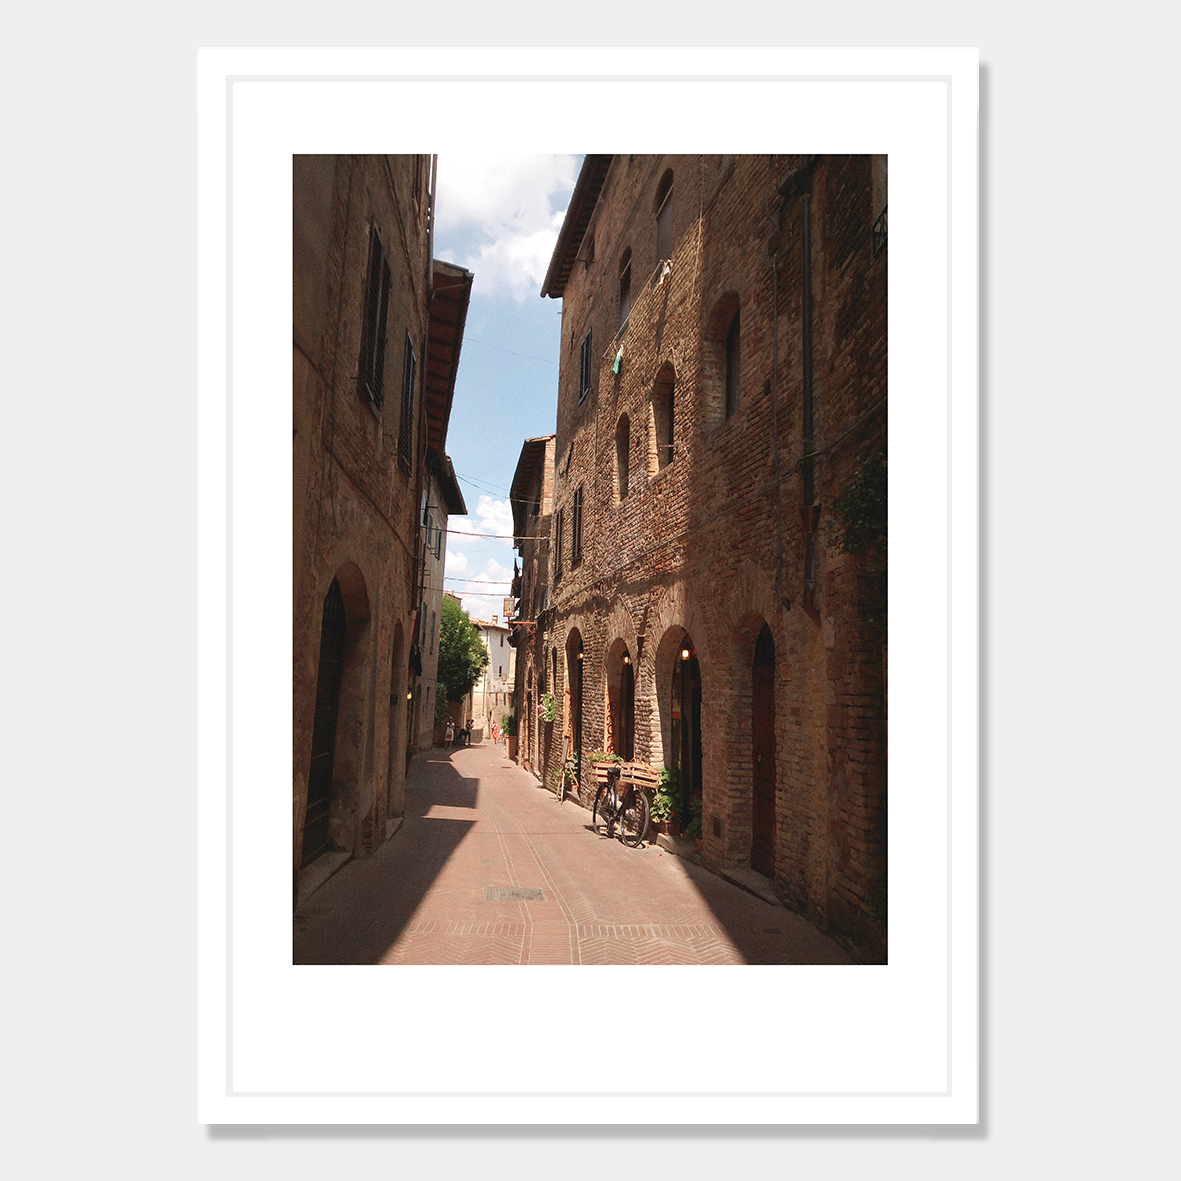 A Bicycle and Still Life in a Backstreet of San Gimignano, Naples, Italy, Photographic Art Print in a Skinny White Frame